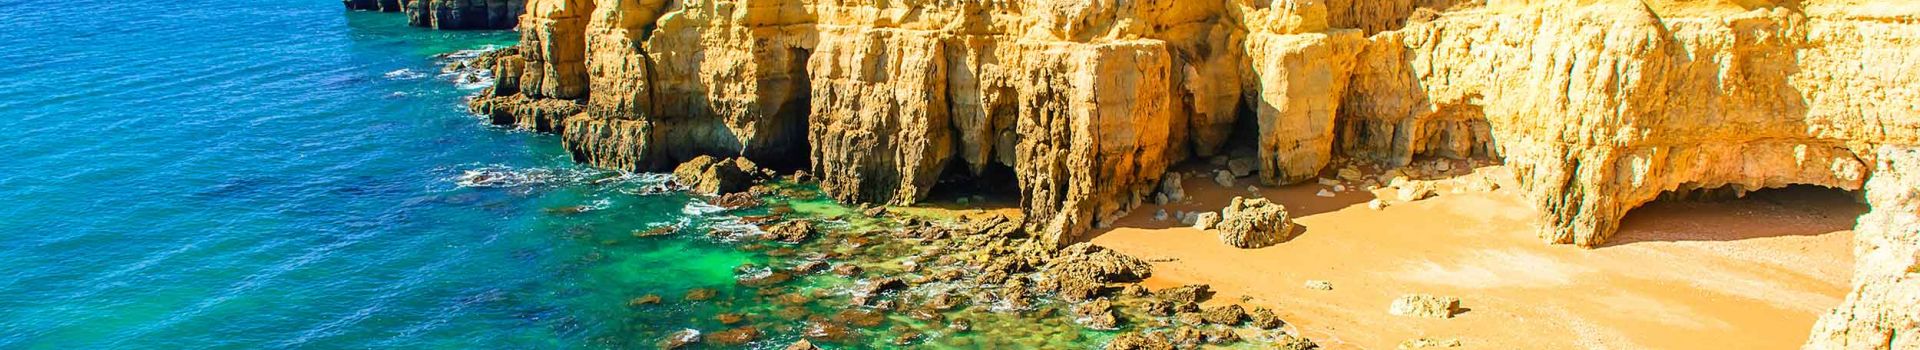 Cheap holidays to the Algarve from Shannon Airport with Cassidy Travel